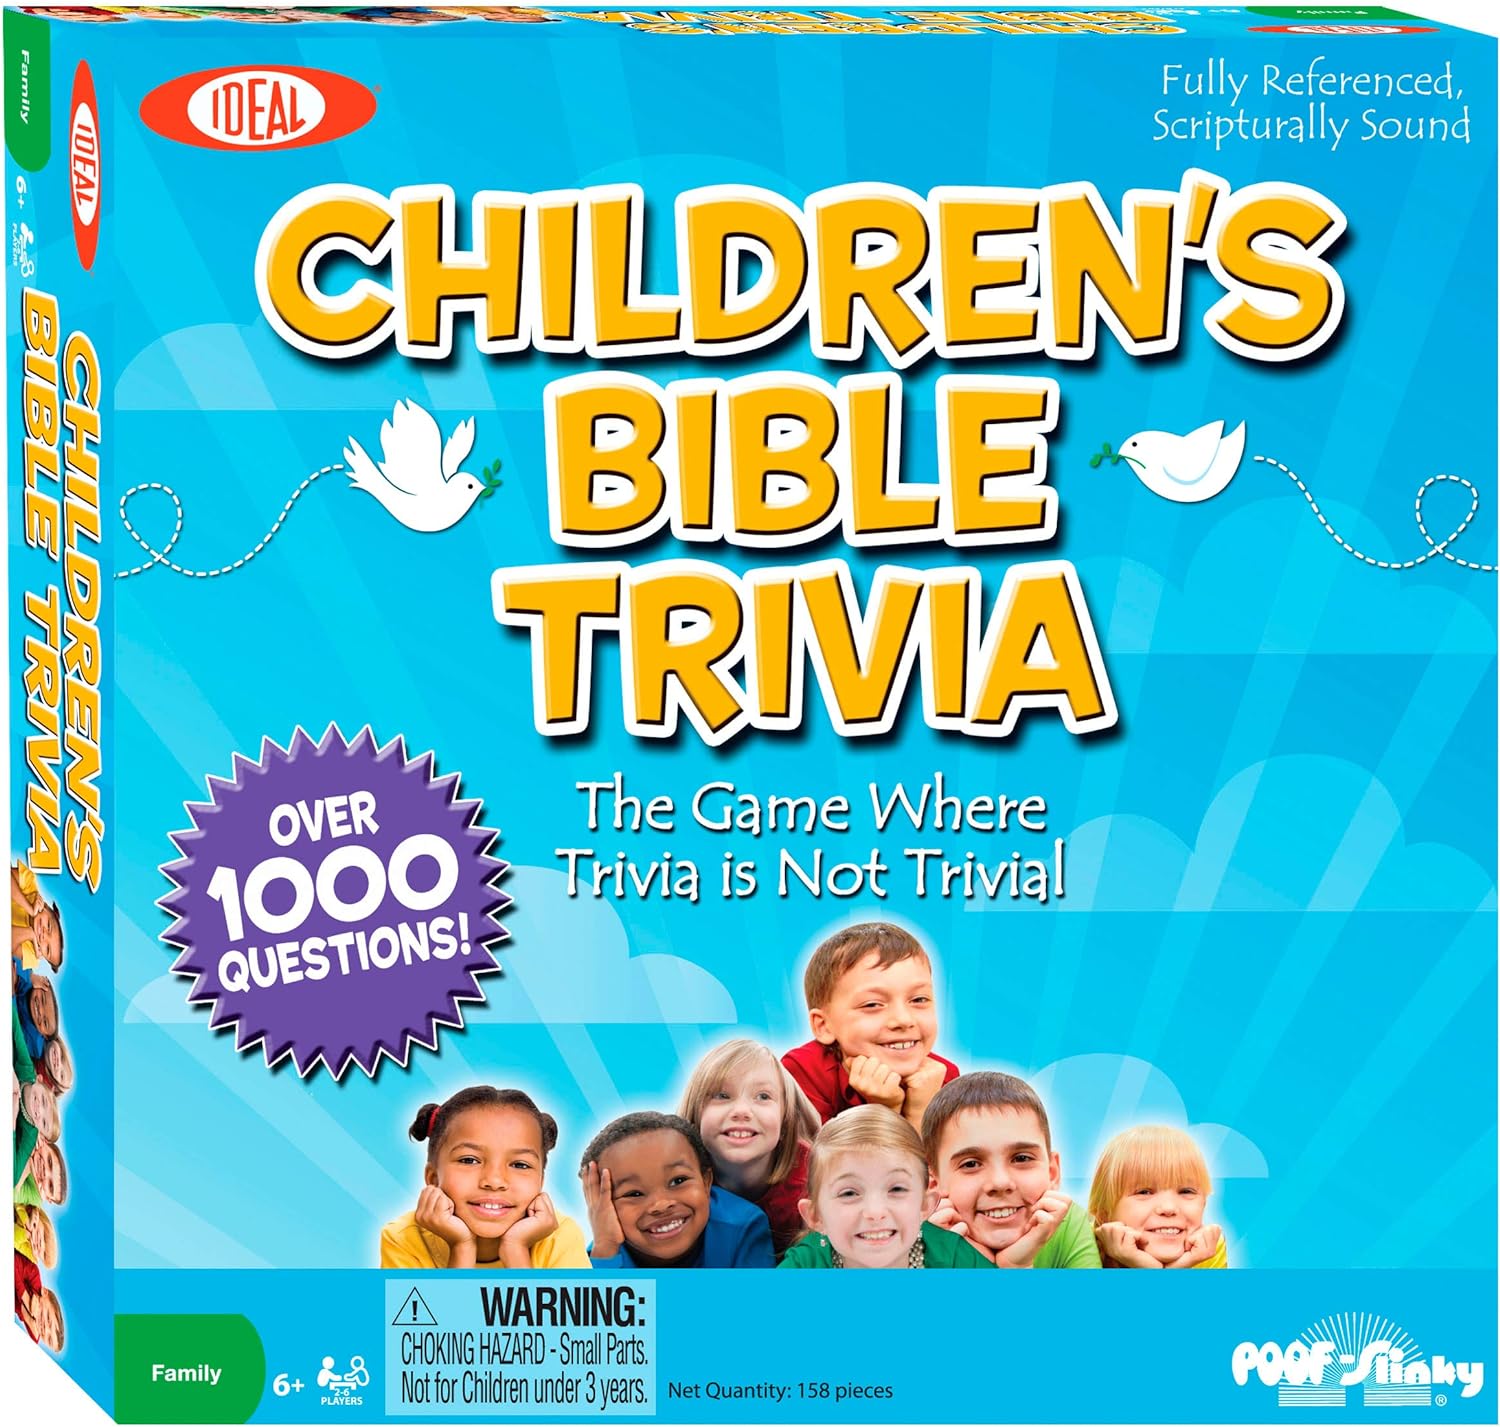 Ideal Childrens Bible Trivia Game